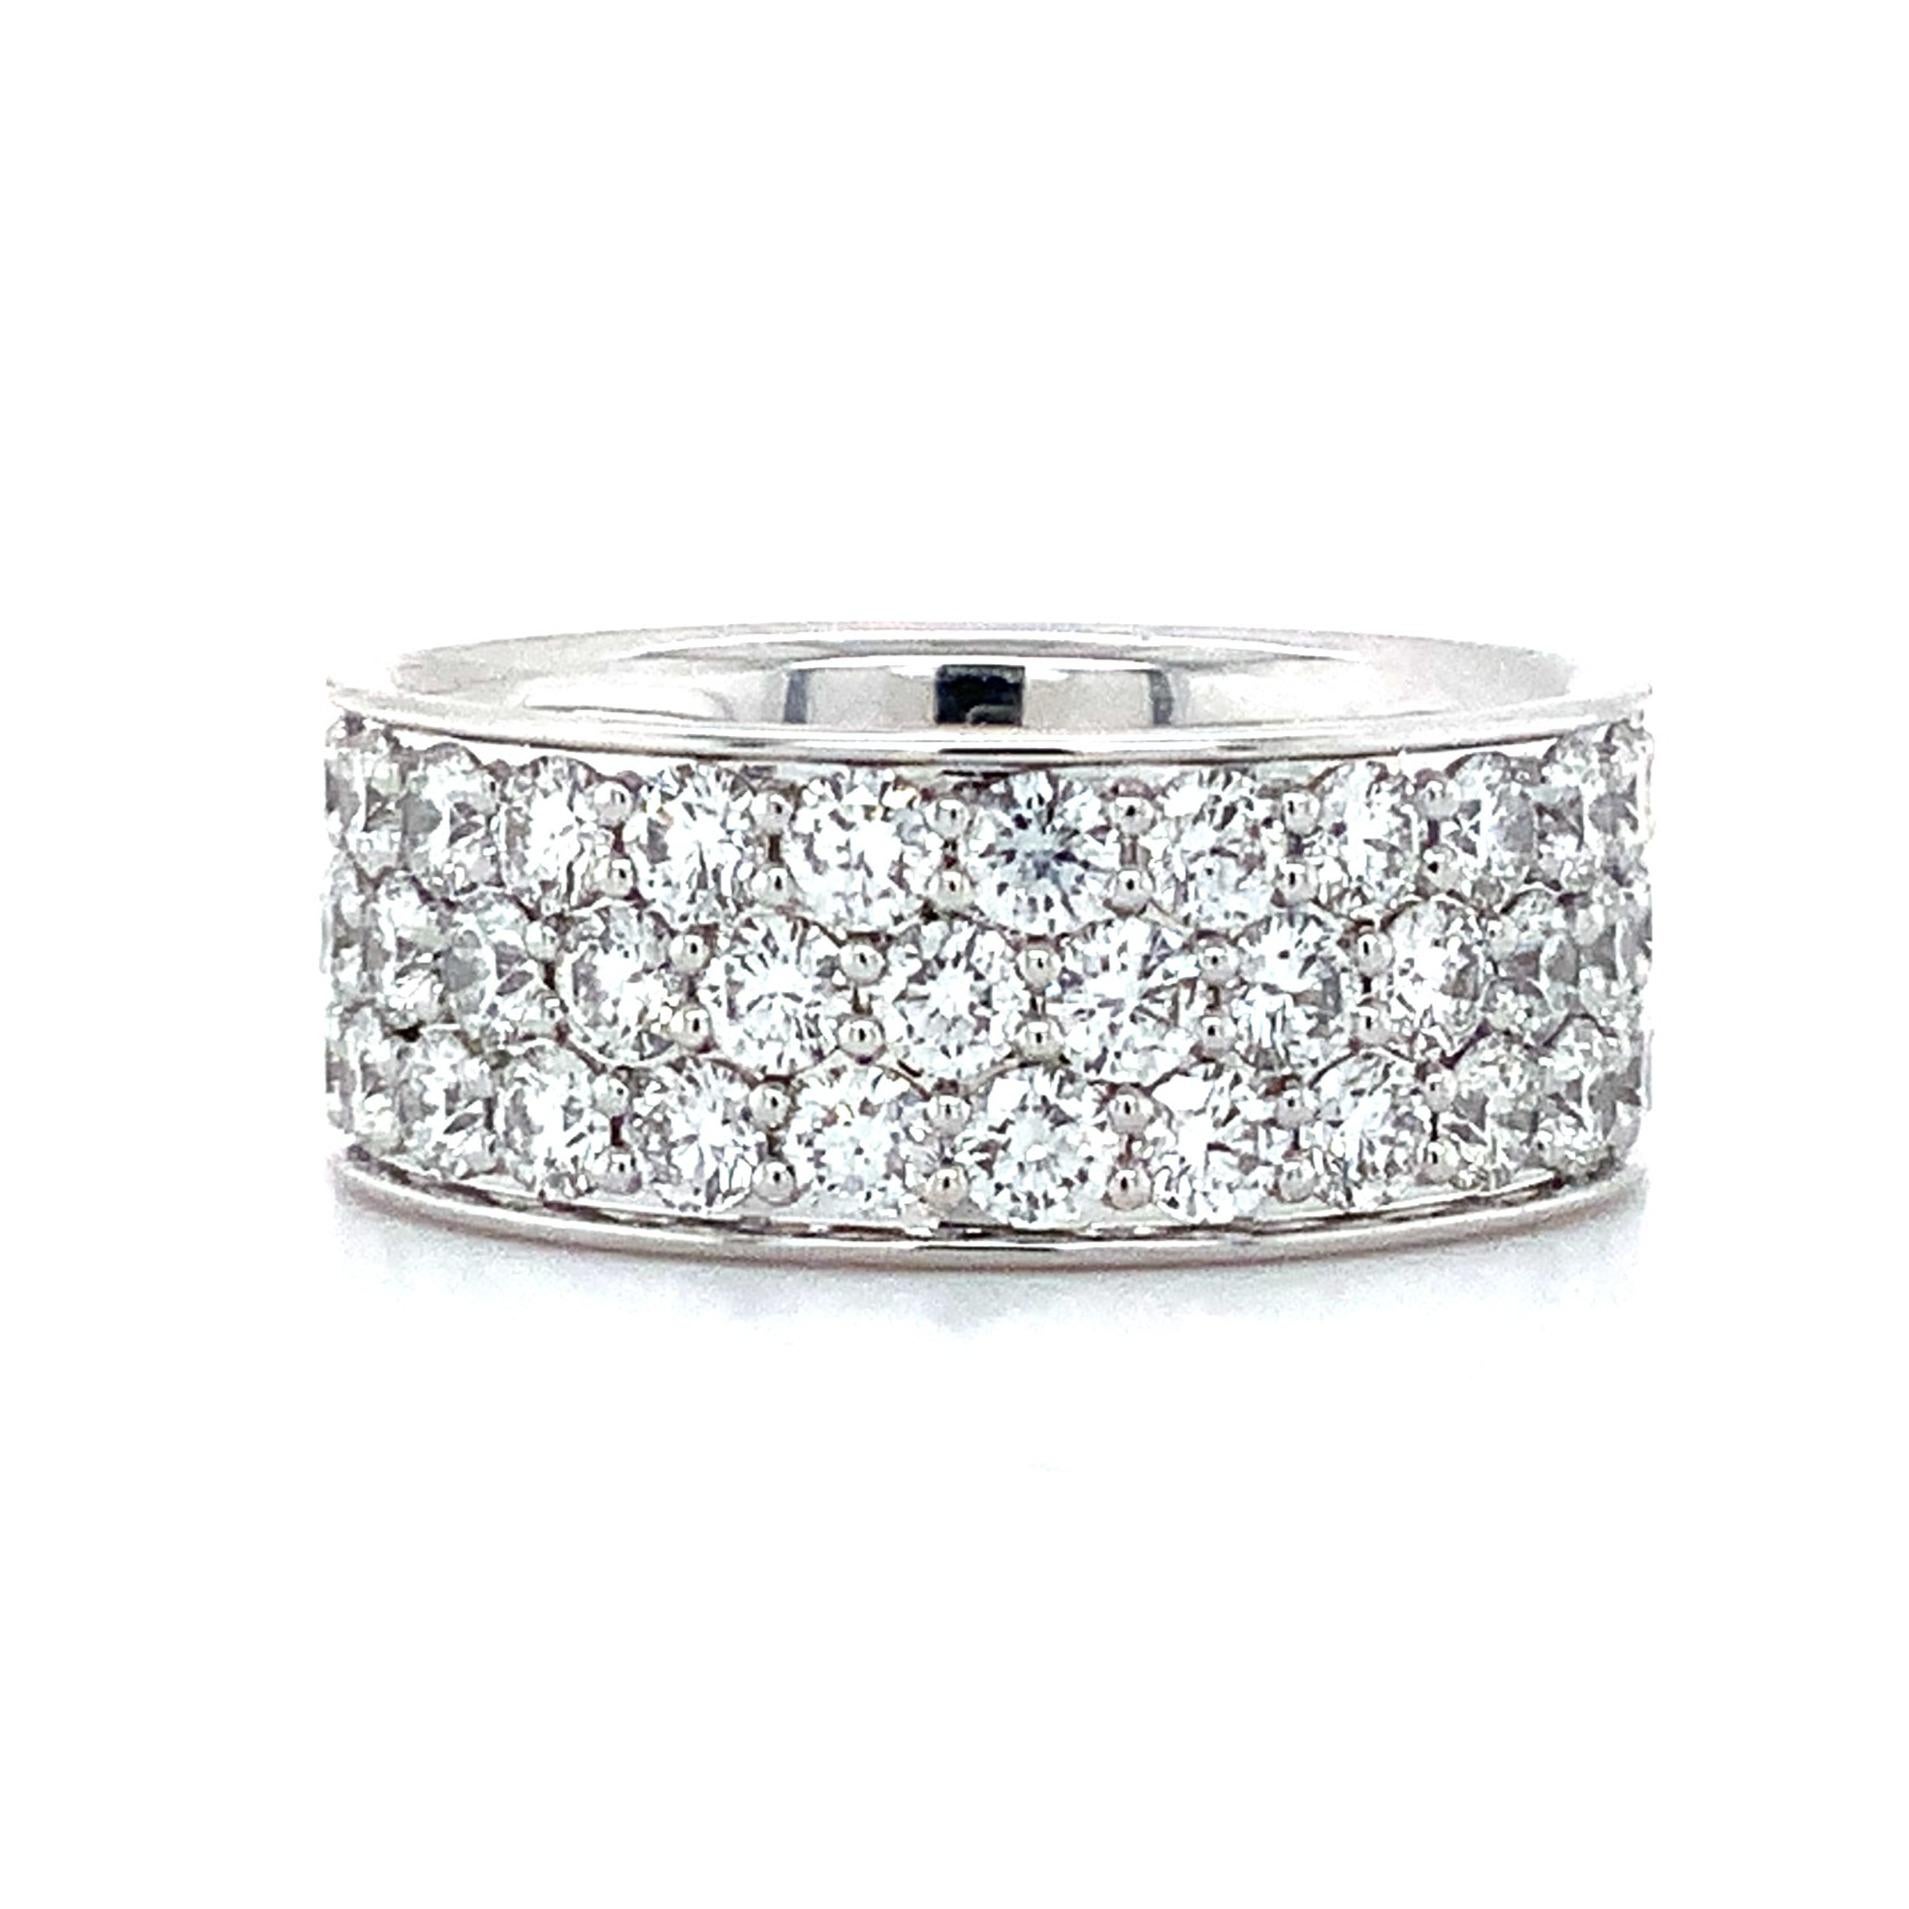 This stunning Memoire Collection Pavé Silk Half Round Diamond Band features 46 magnificent Round Brilliant Cut Diamonds totaling 2.27 carats. Hues of F Color and VS1 Clarity are complemented by an Excellent Make and Polish, while an 8.05 mm width